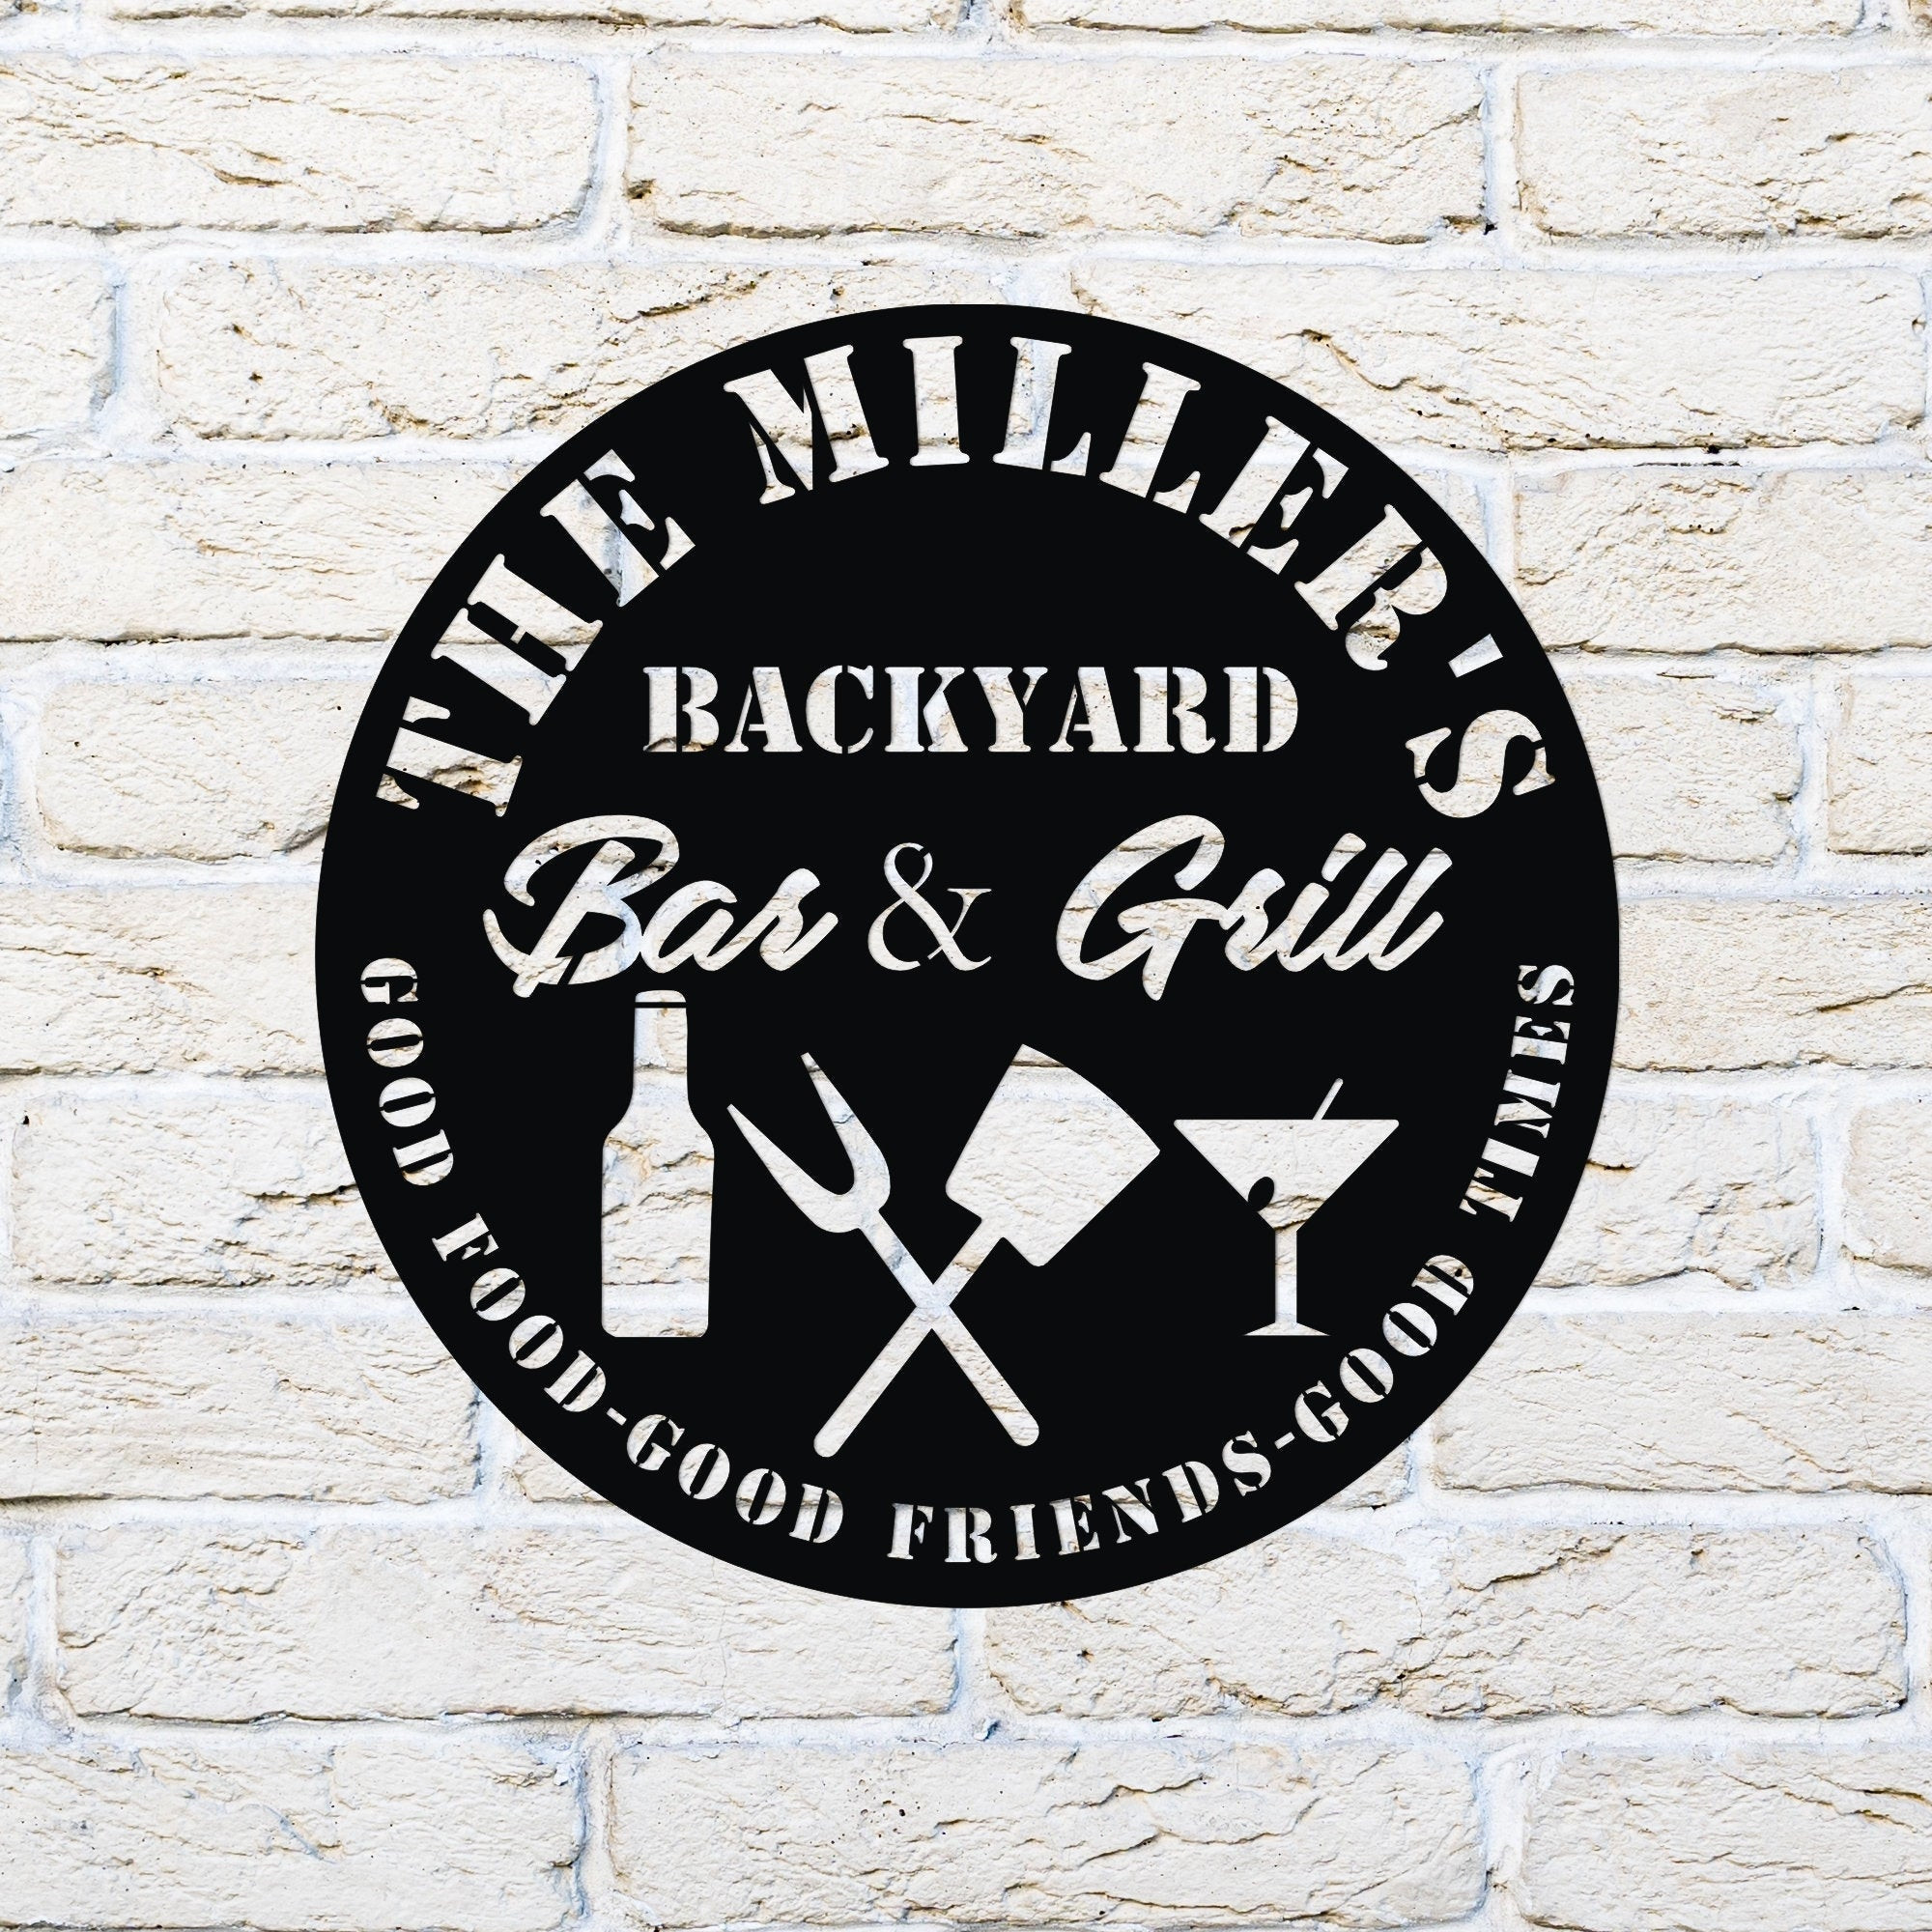 Backyard Bar And Grill Custom Metal Sign, Personalized Bar Sign, Whiskey Sign, Metal Family Name Sign, Pub Sign, Pub Wall Decor, Irish Pub Laser Cut Metal Signs Custom Gift Ideas 12x12IN